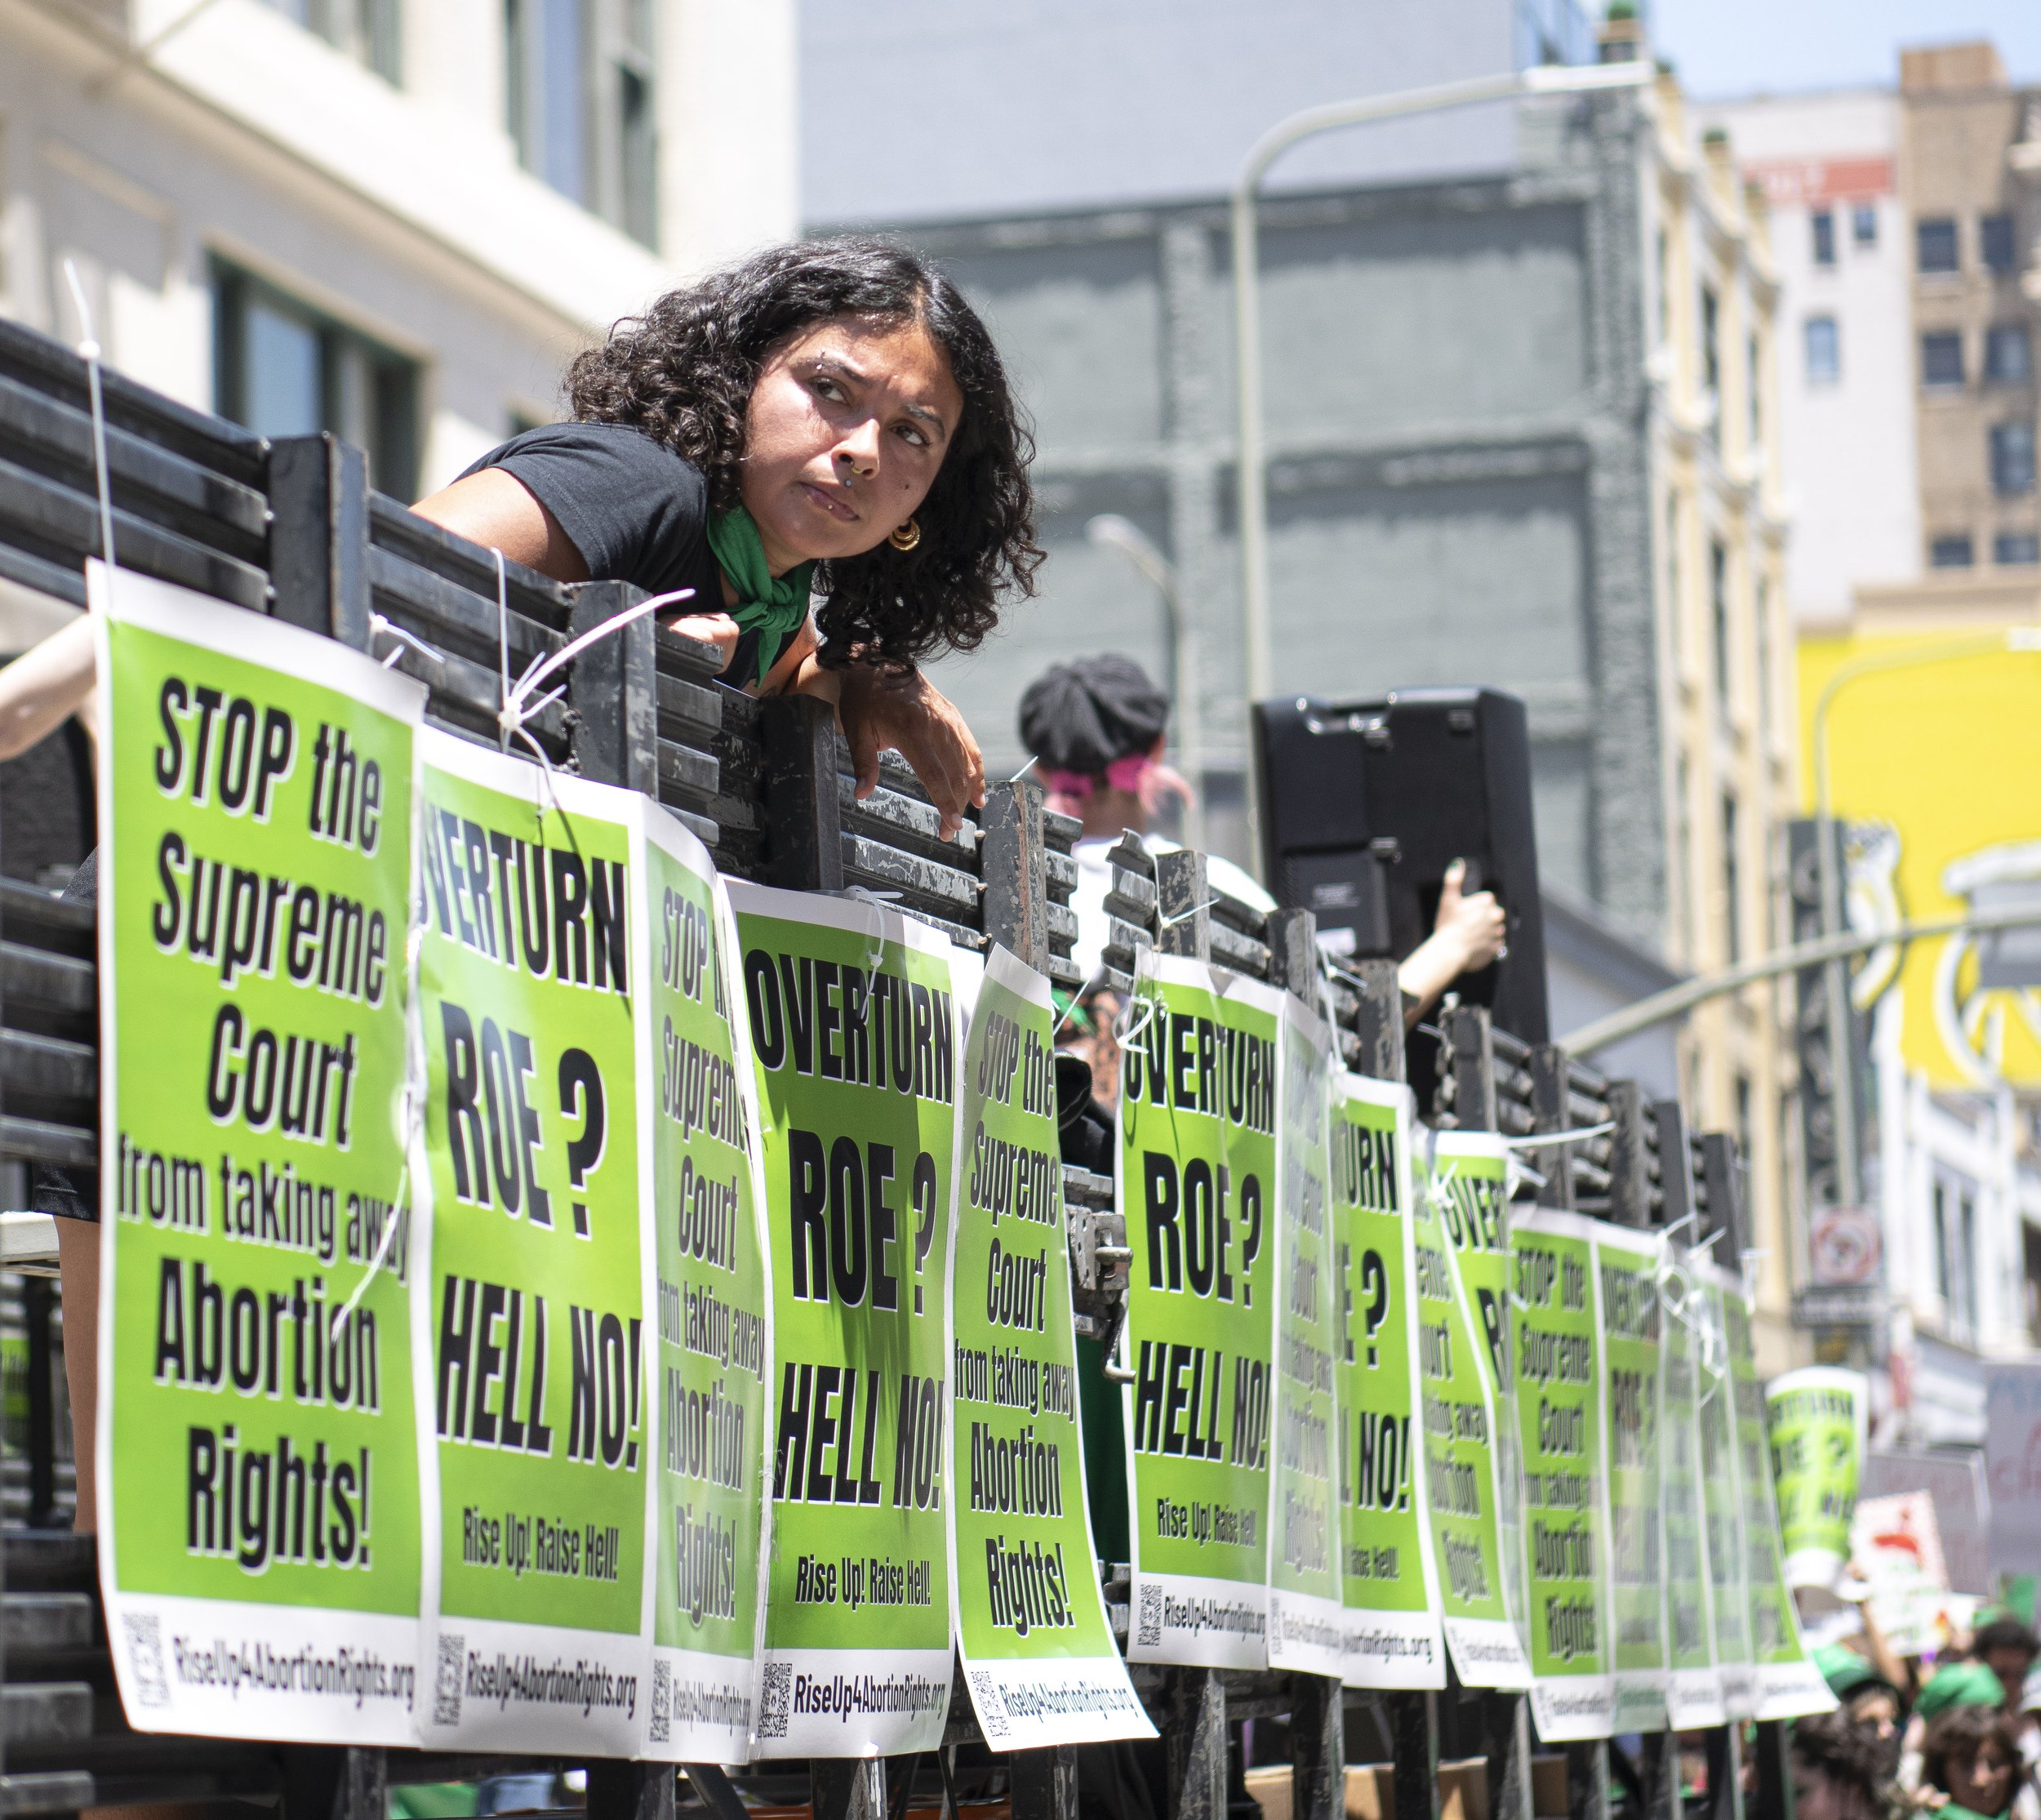  A Rise4AbortionRights leader looks at the oncoming police officers as they march through the streets of DTLA on May 14, 2022 in Los Angeles, CA. (Jon Putman | The Corsair) 